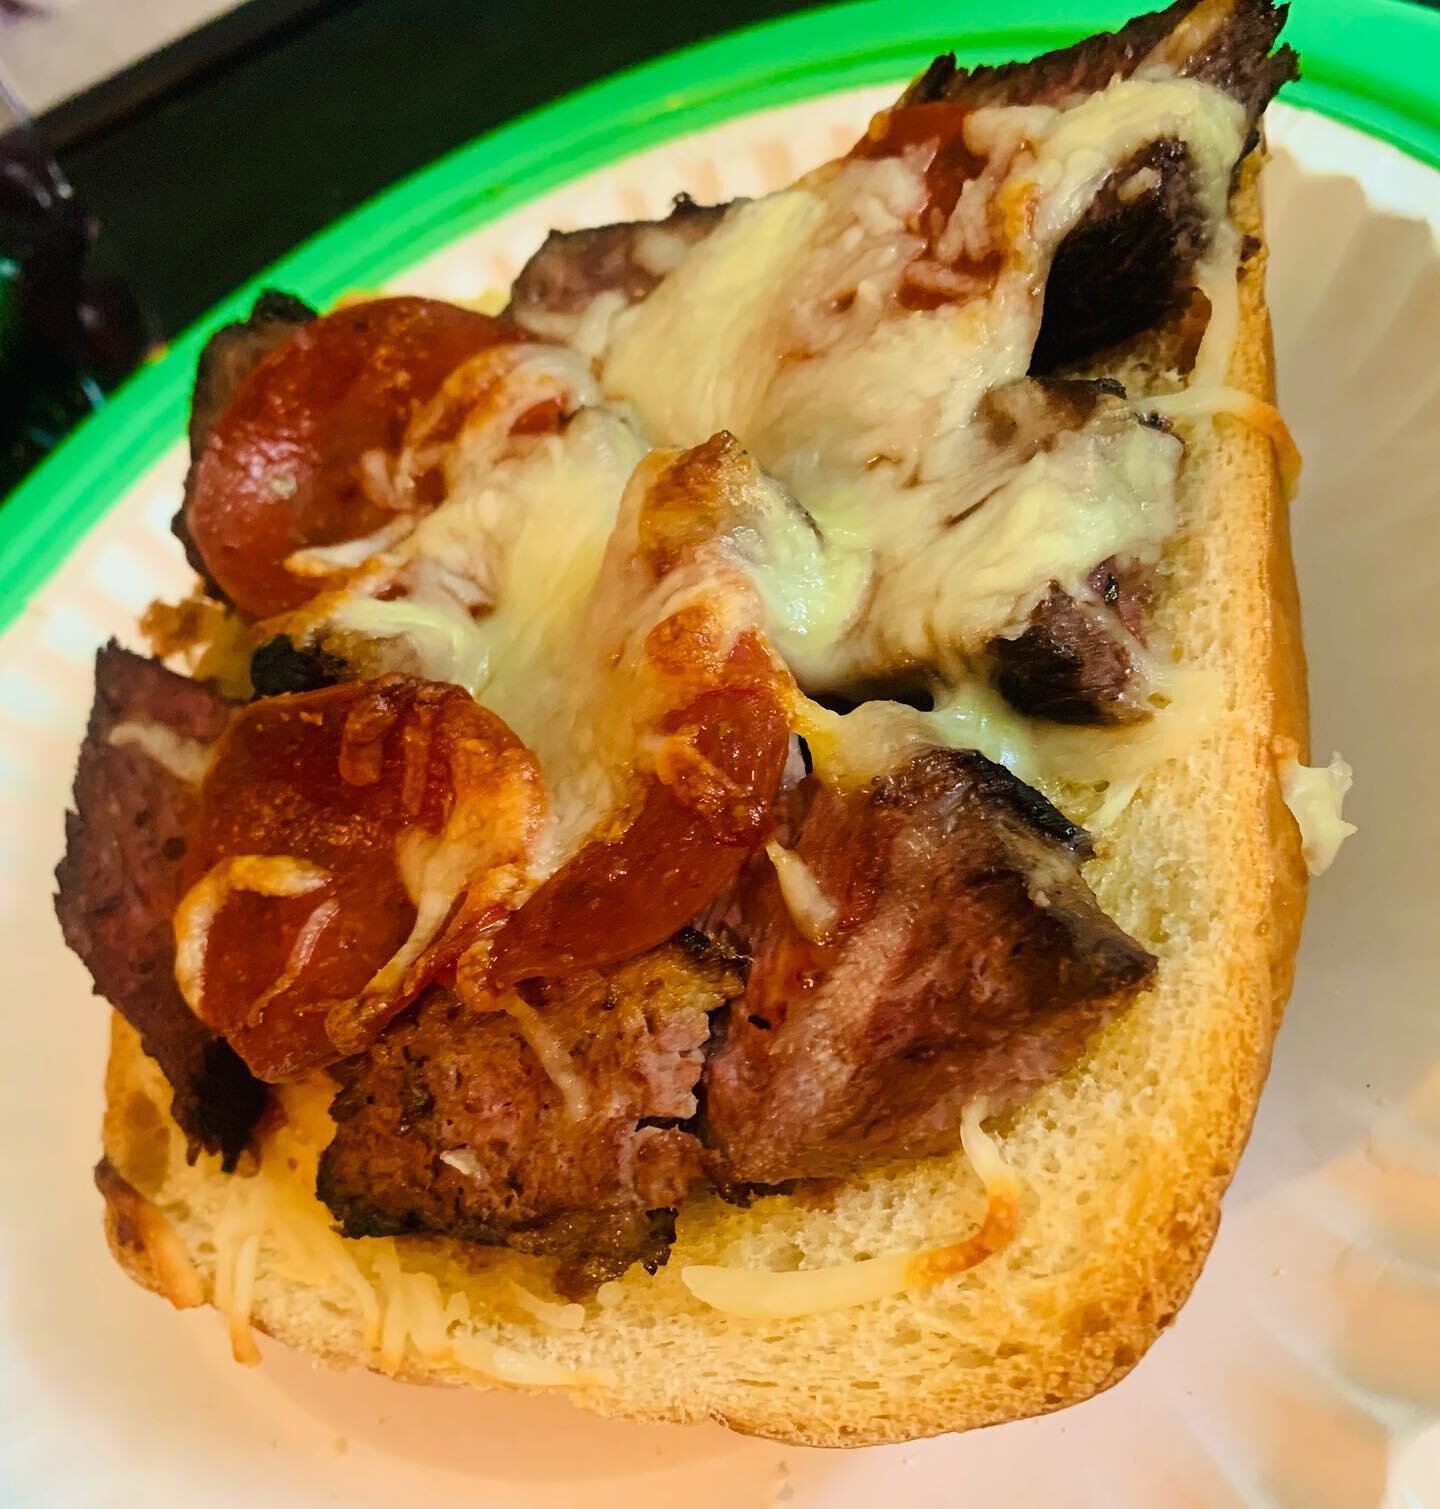 Toasted Steak pepperoni cheese on French bread #imadethis